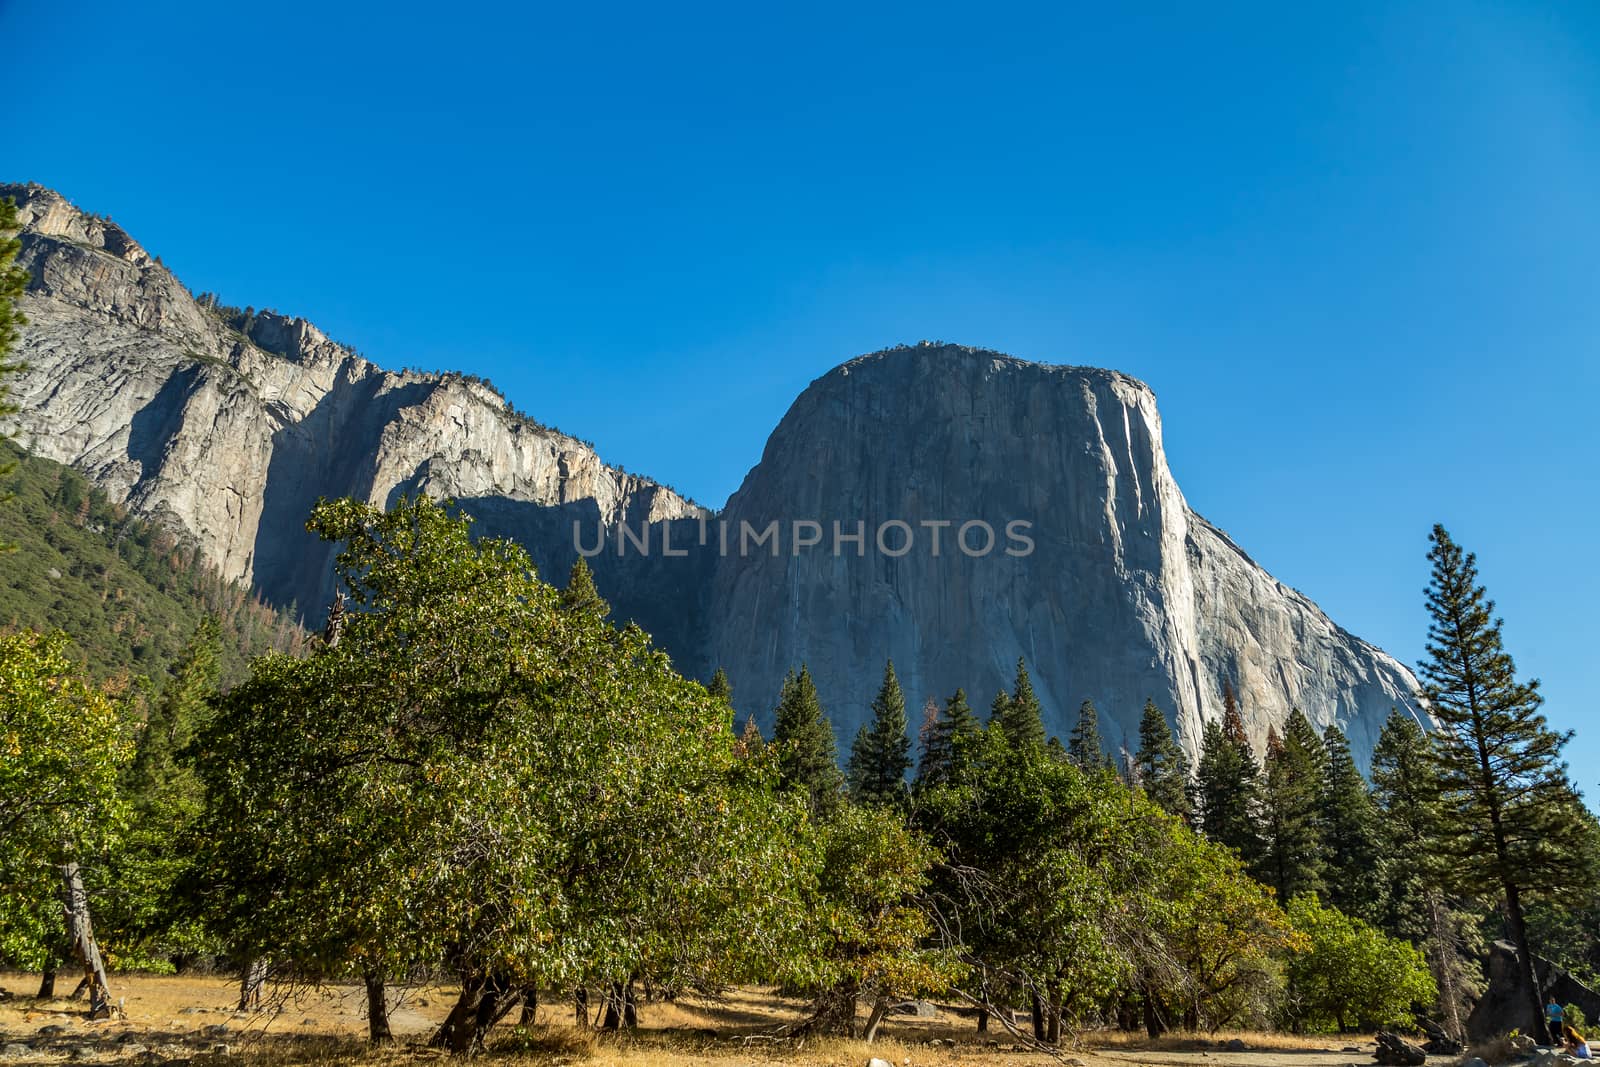 El Capitan (Spanish for The Captain, The Chief) is a vertical rock formation in Yosemite National Park, located on the north side of Yosemite Valley, near its western end. The granite monolith extends about 3,000 feet (900 m) from base to summit along its tallest face and is one of the world's favorite challenges for rock climbers and BASE jumpers.